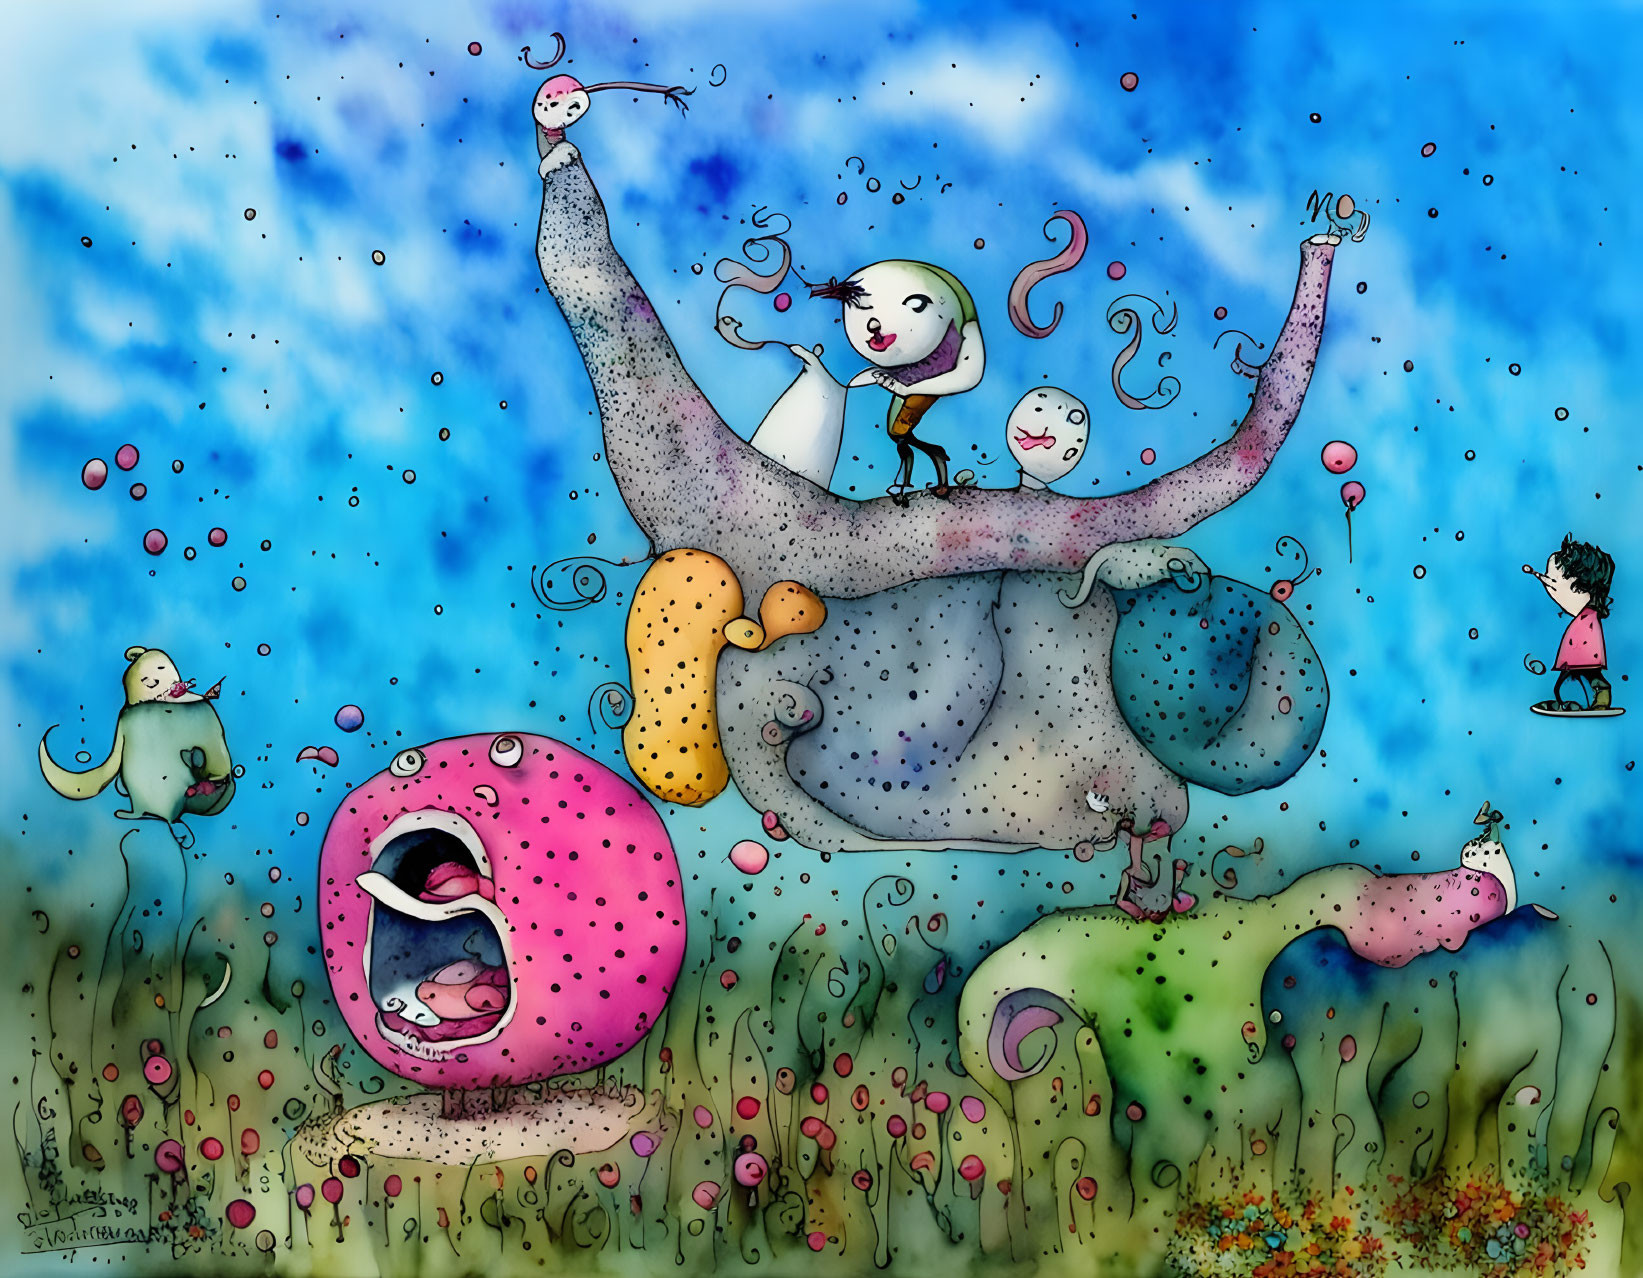 Colorful underwater illustration with fantastical creatures and characters